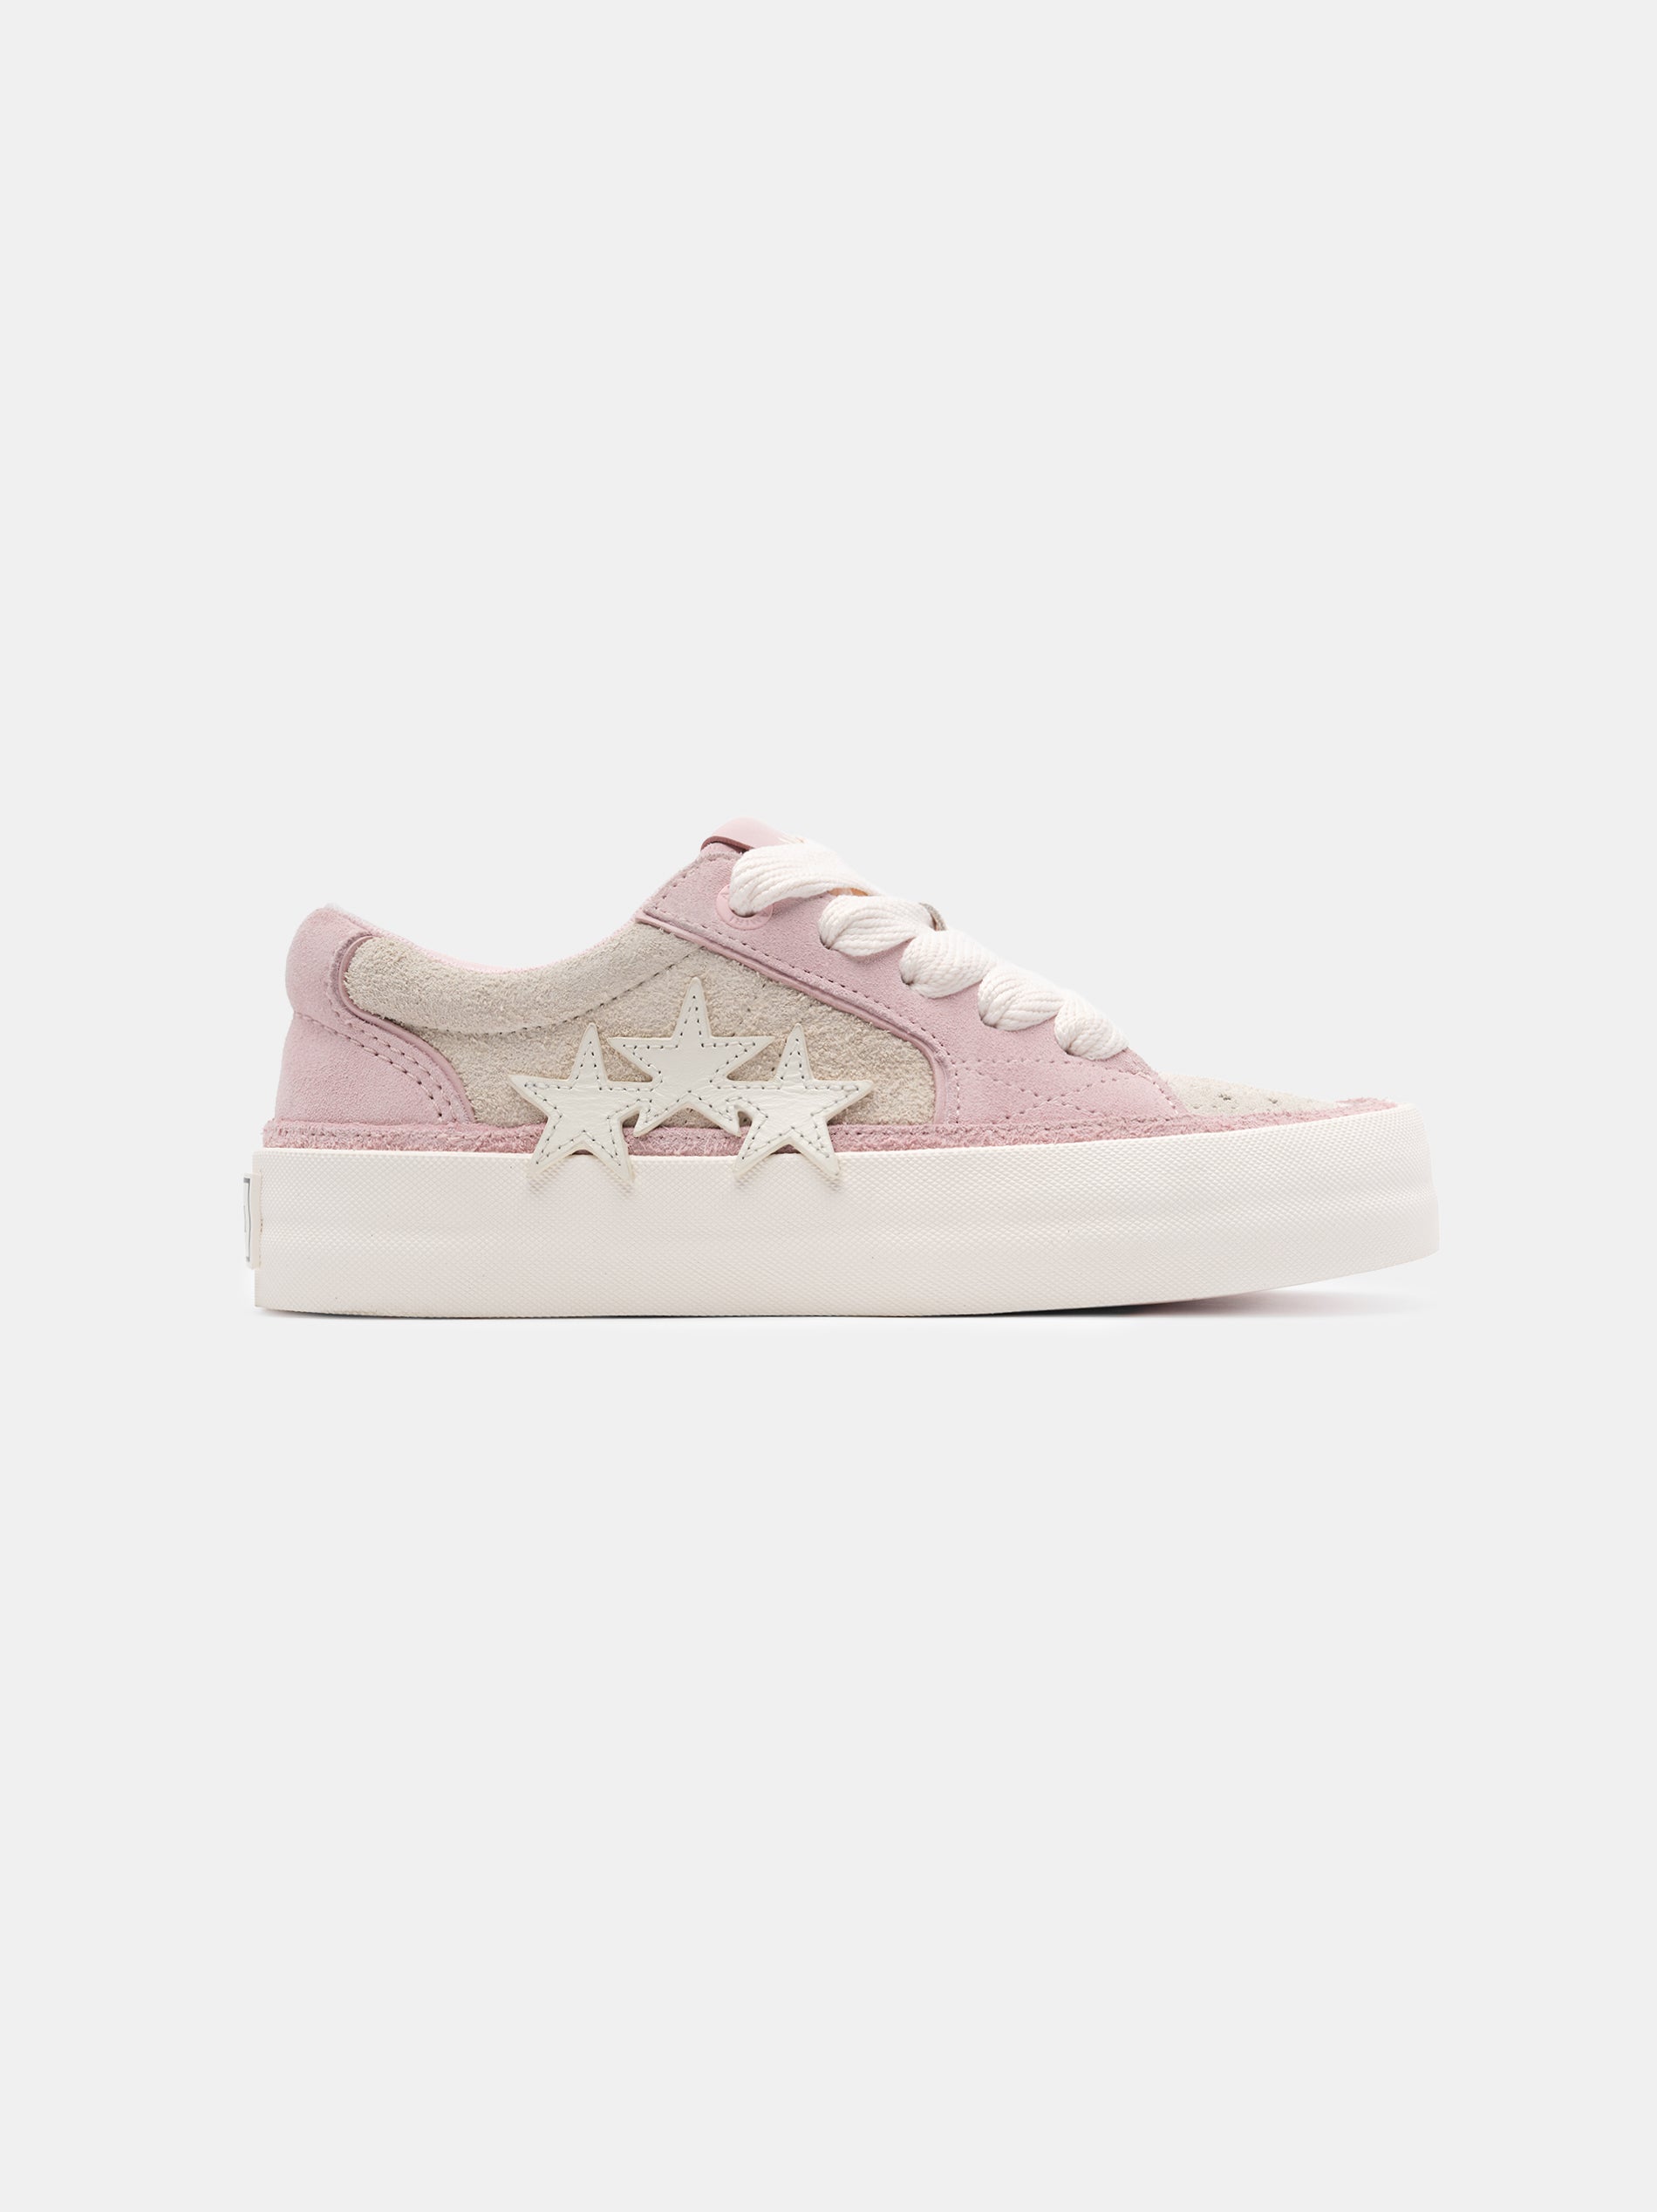 Product WOMEN - SUNSET SKATE LOW - Birch Pink featured image